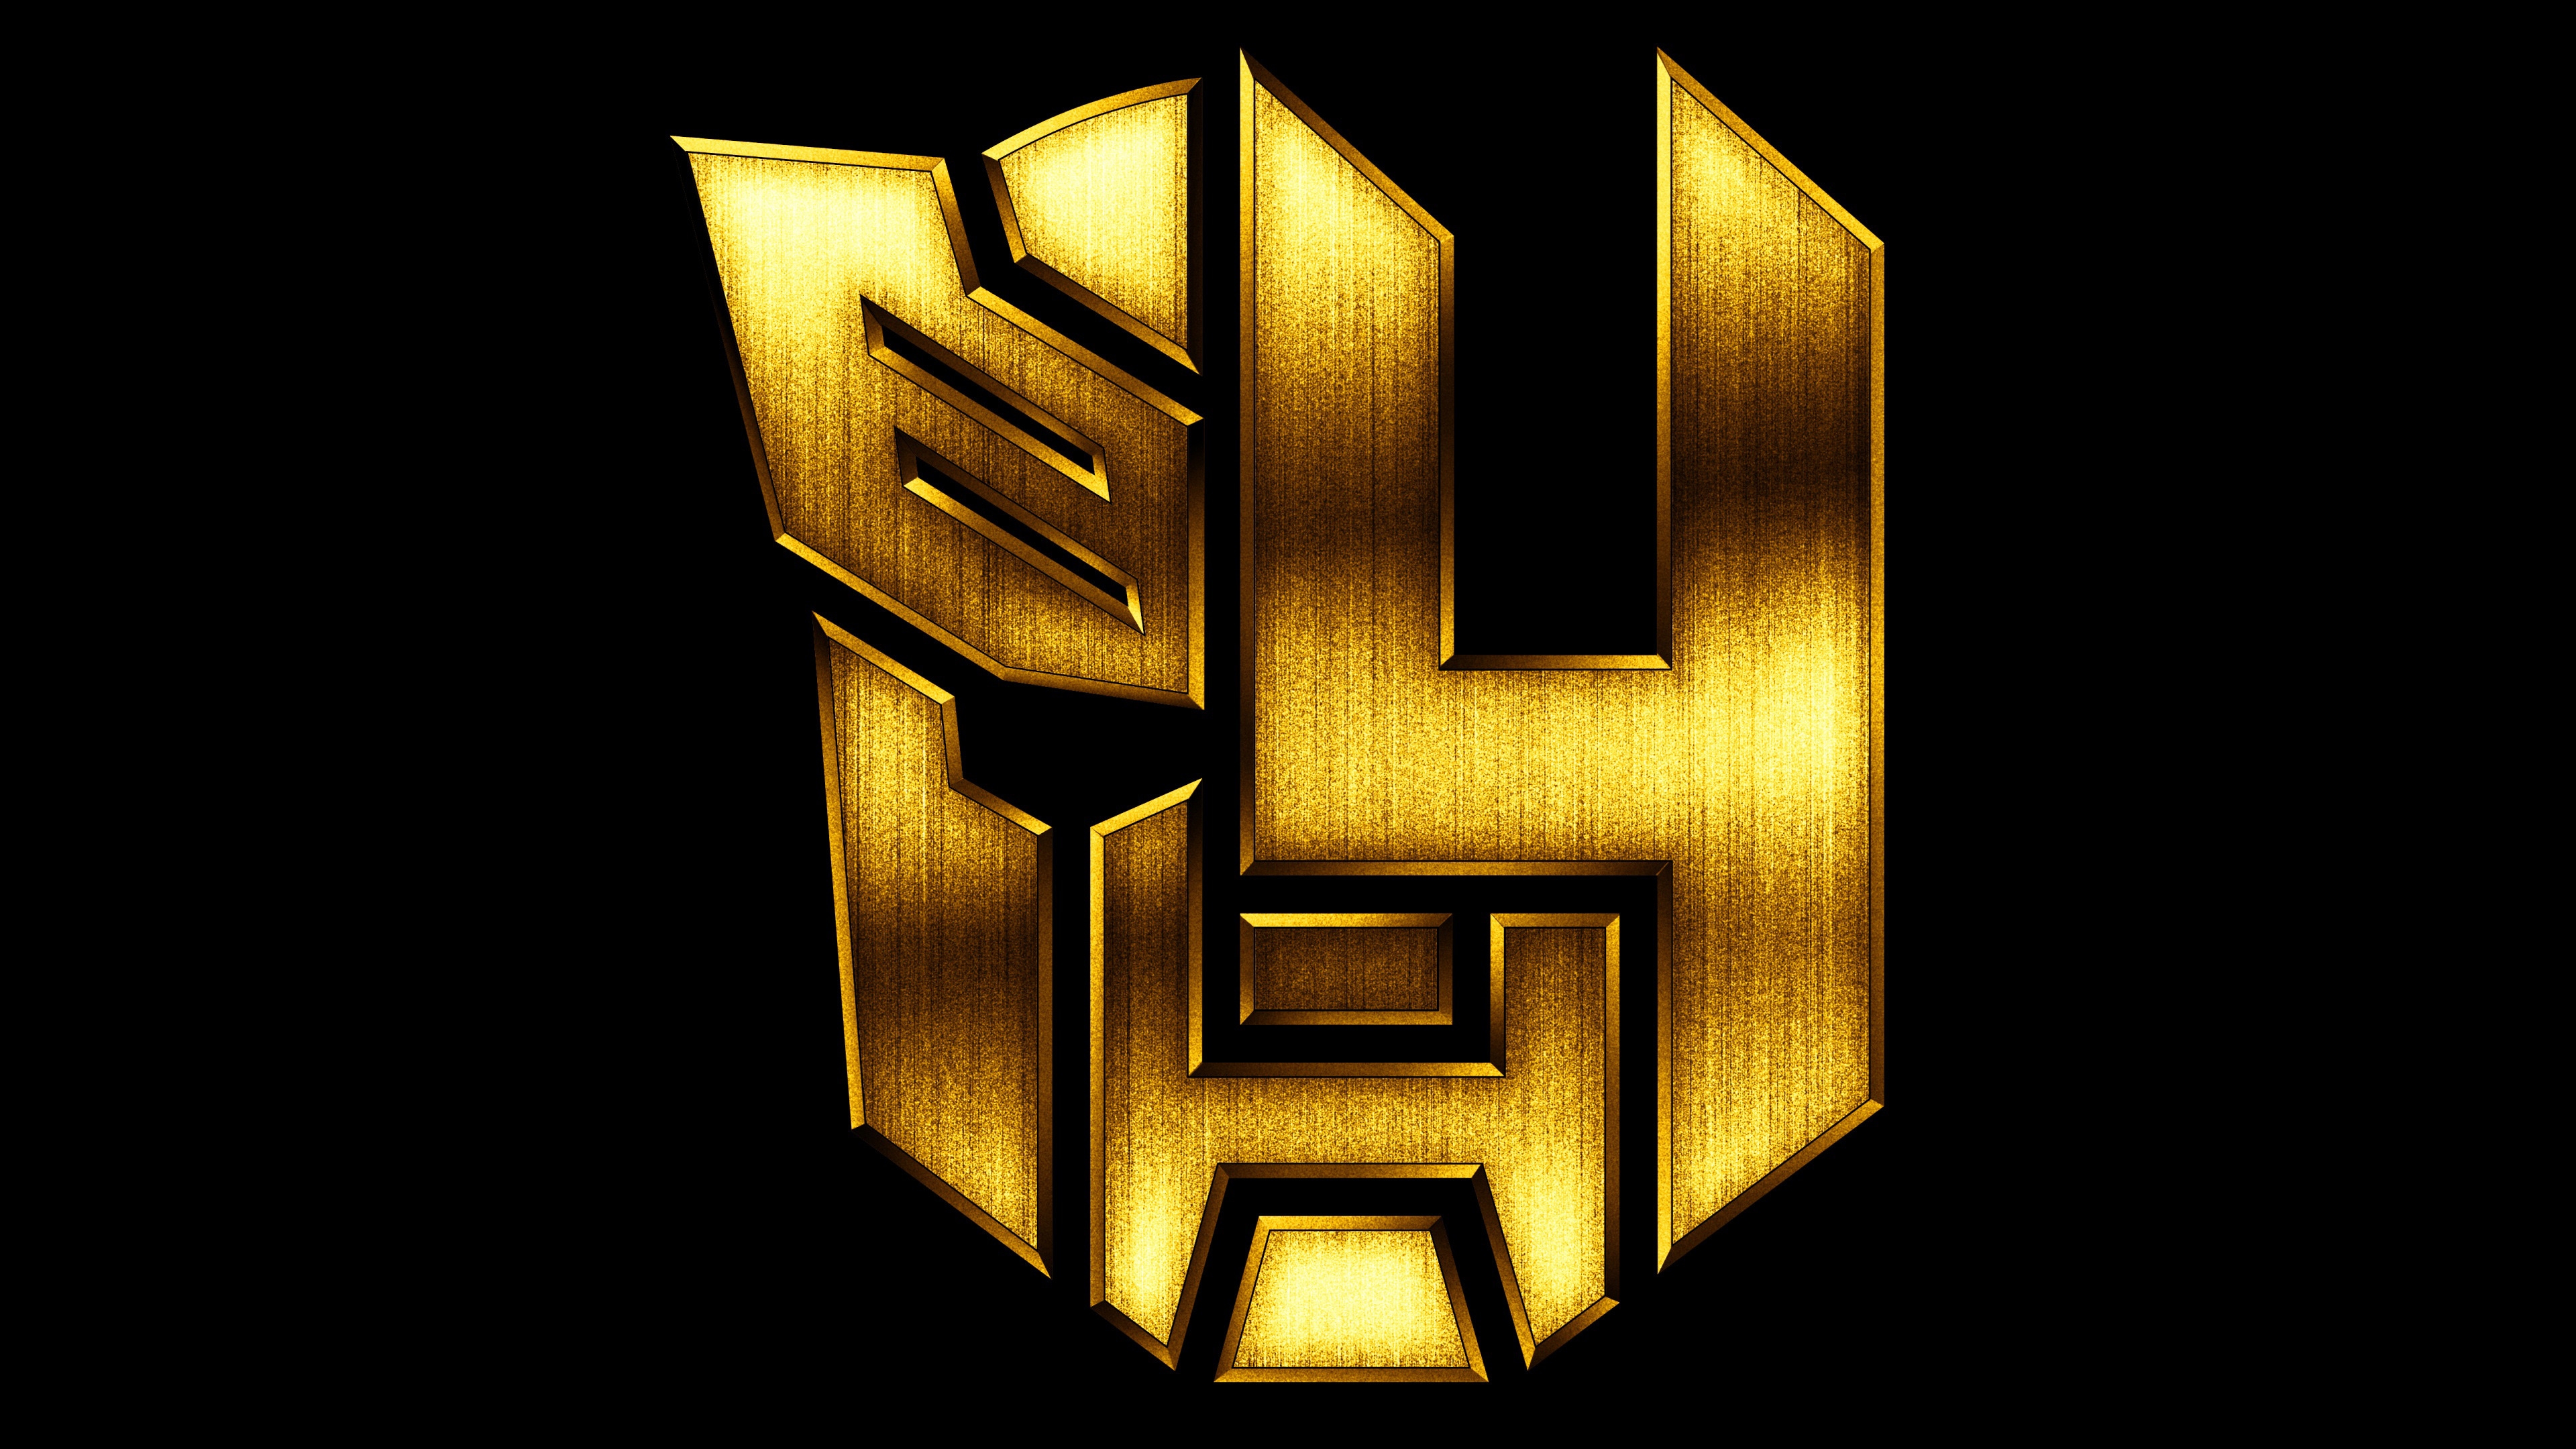 Transformers 4 Age of Extinction 2014 for 3840 x 2160 Ultra HD resolution